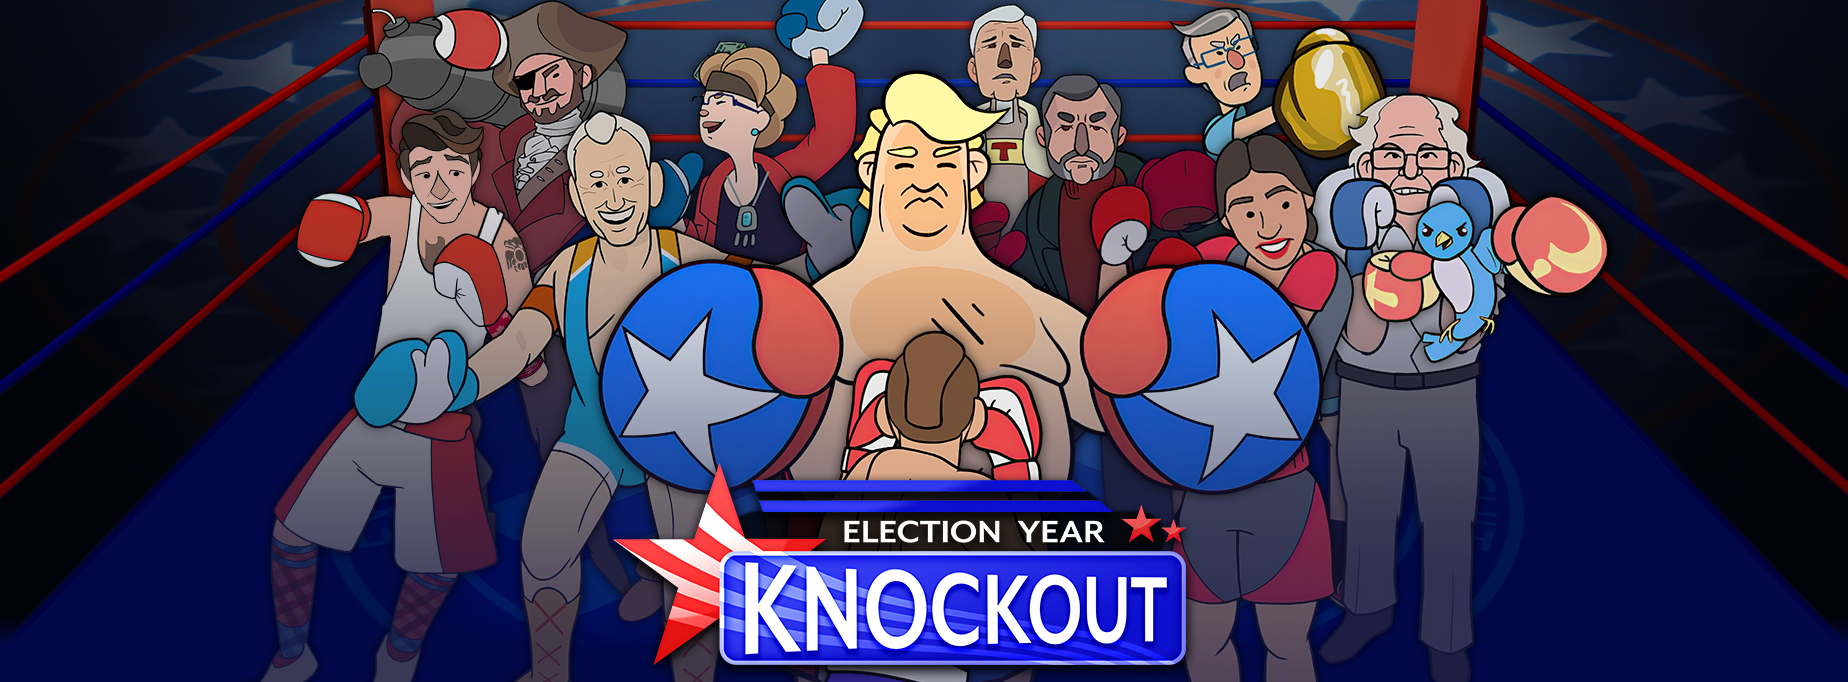 Election Year Knockout Feature Image: The player character faces off against Donald Thump with the rest of the game's cast in the near background.